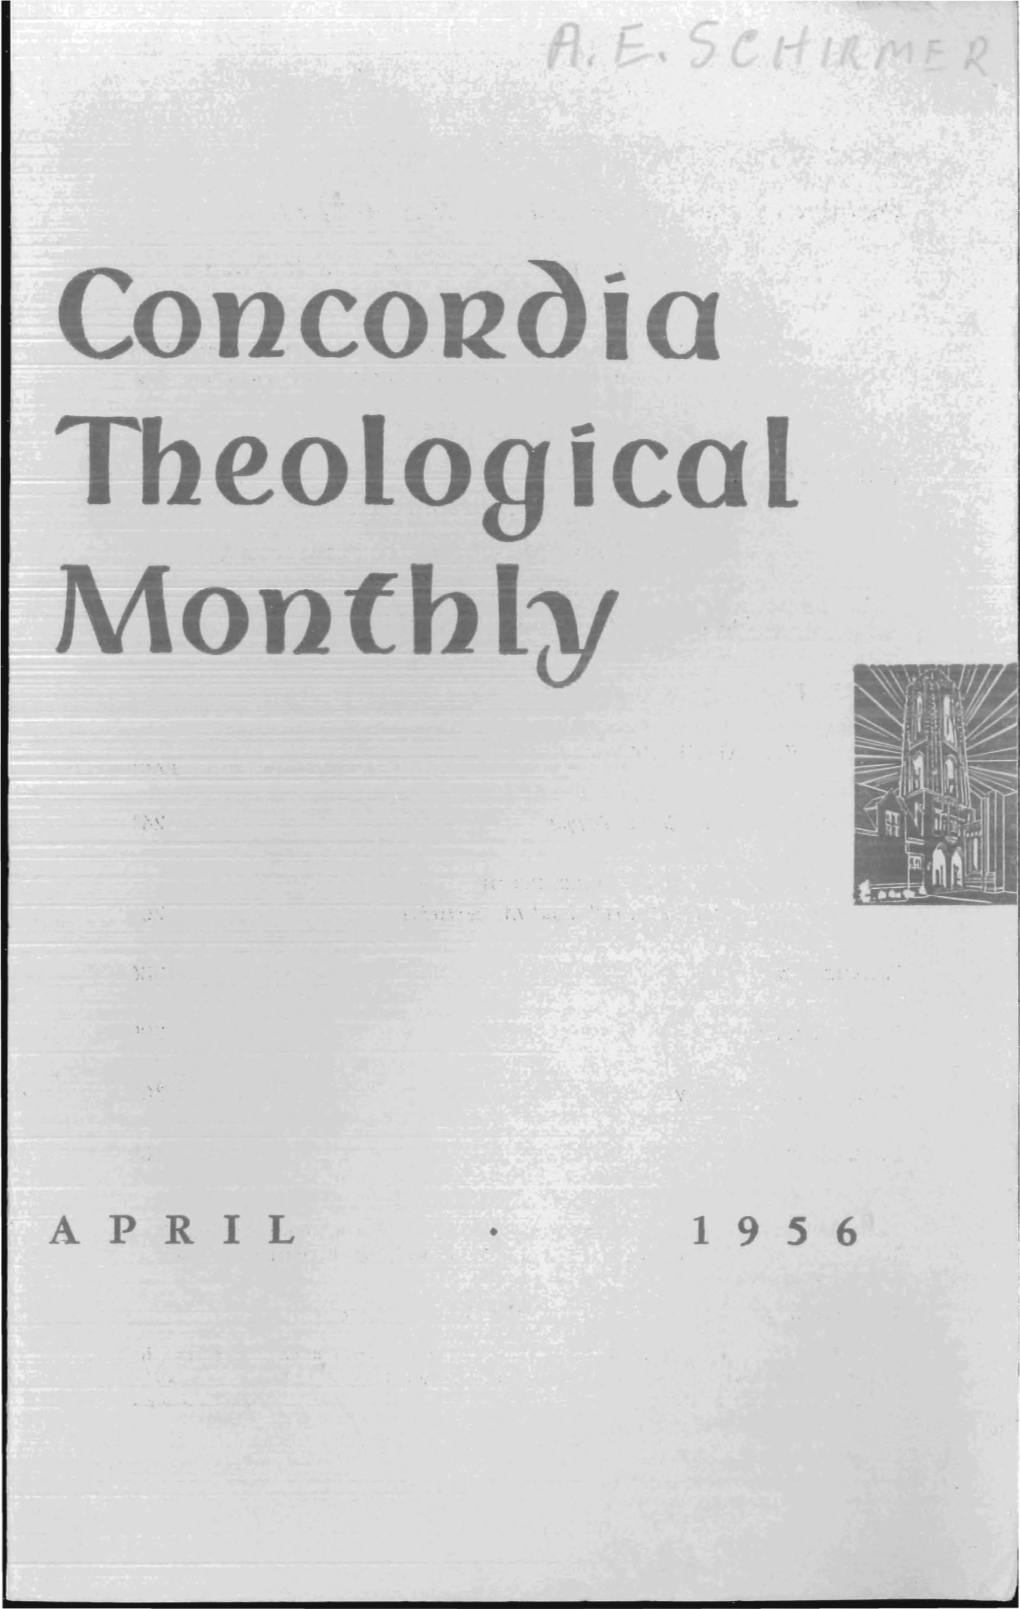 Concojl()Ia Theological Montbly